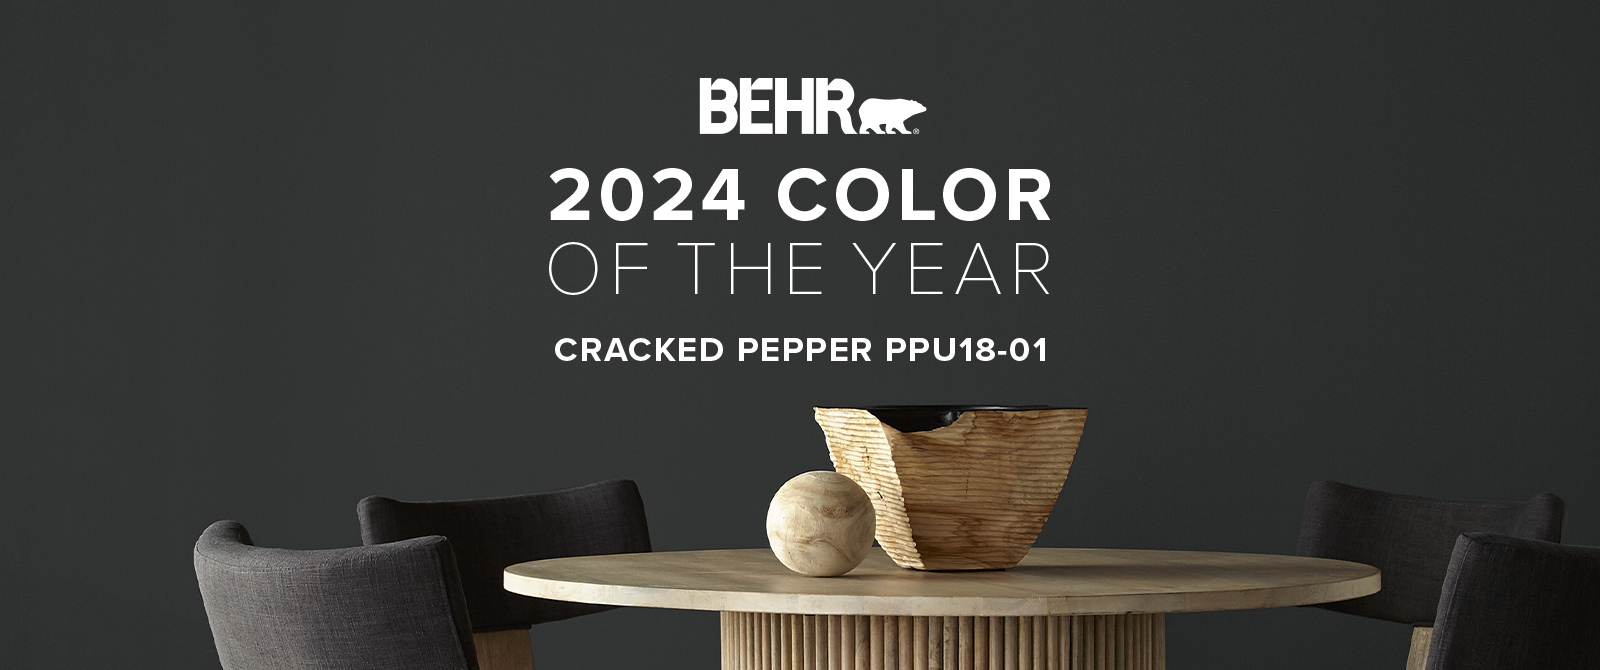 NEW BEHR 2024 Color of the Year - Cracked Pepper